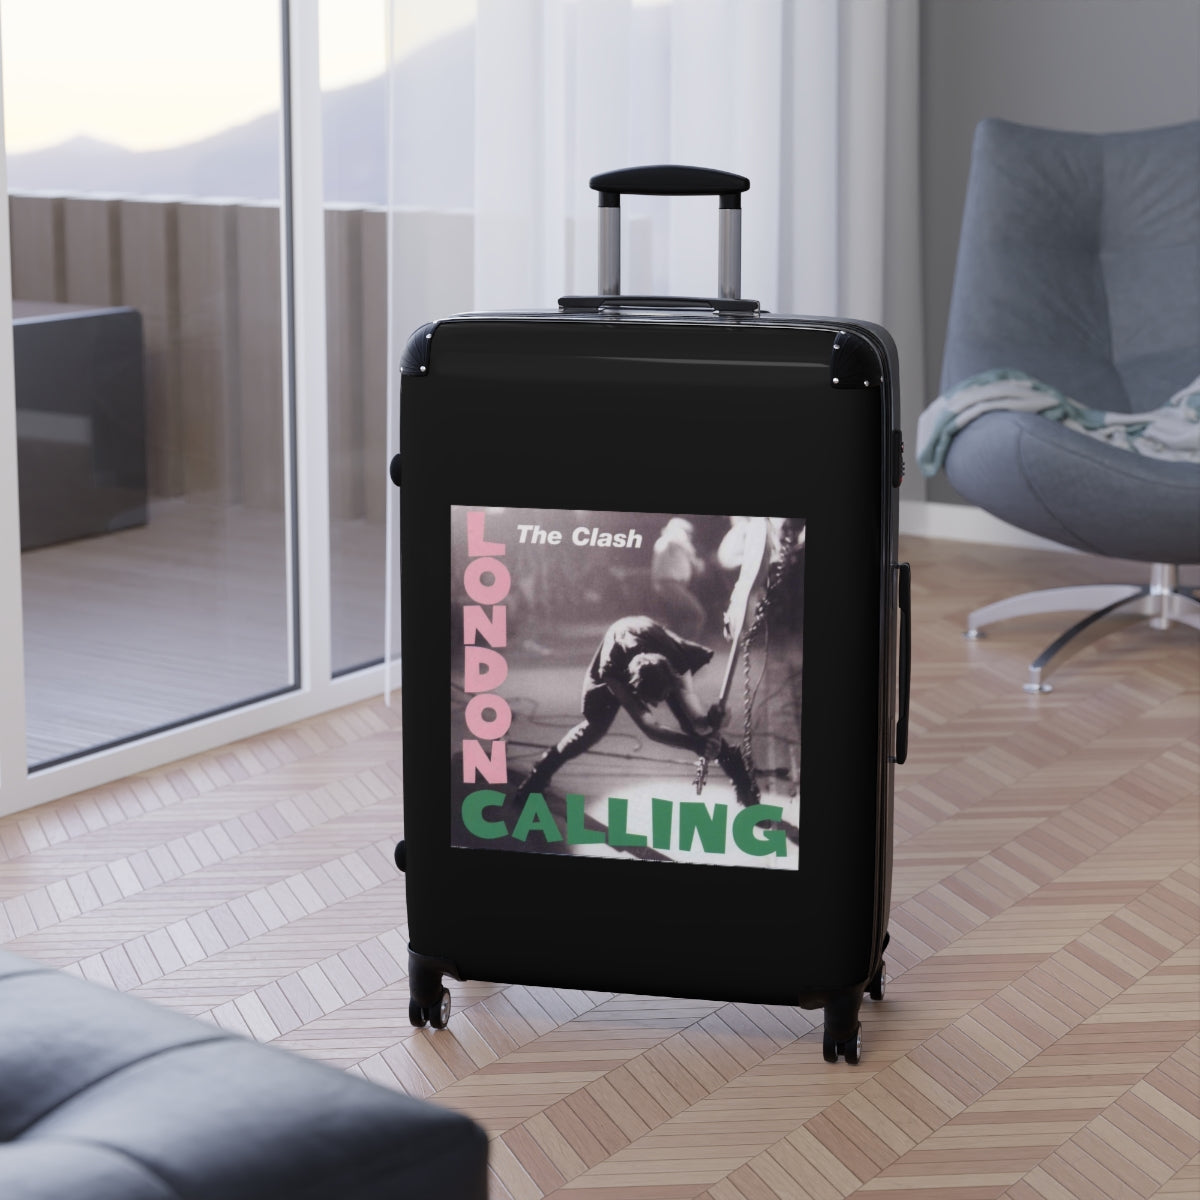 Getrott The Clash London Calling 1979 Black Cabin Suitcase Inner Pockets Extended Storage Adjustable Telescopic Handle Inner Pockets Double wheeled Polycarbonate Hard-shell Built-in Lock